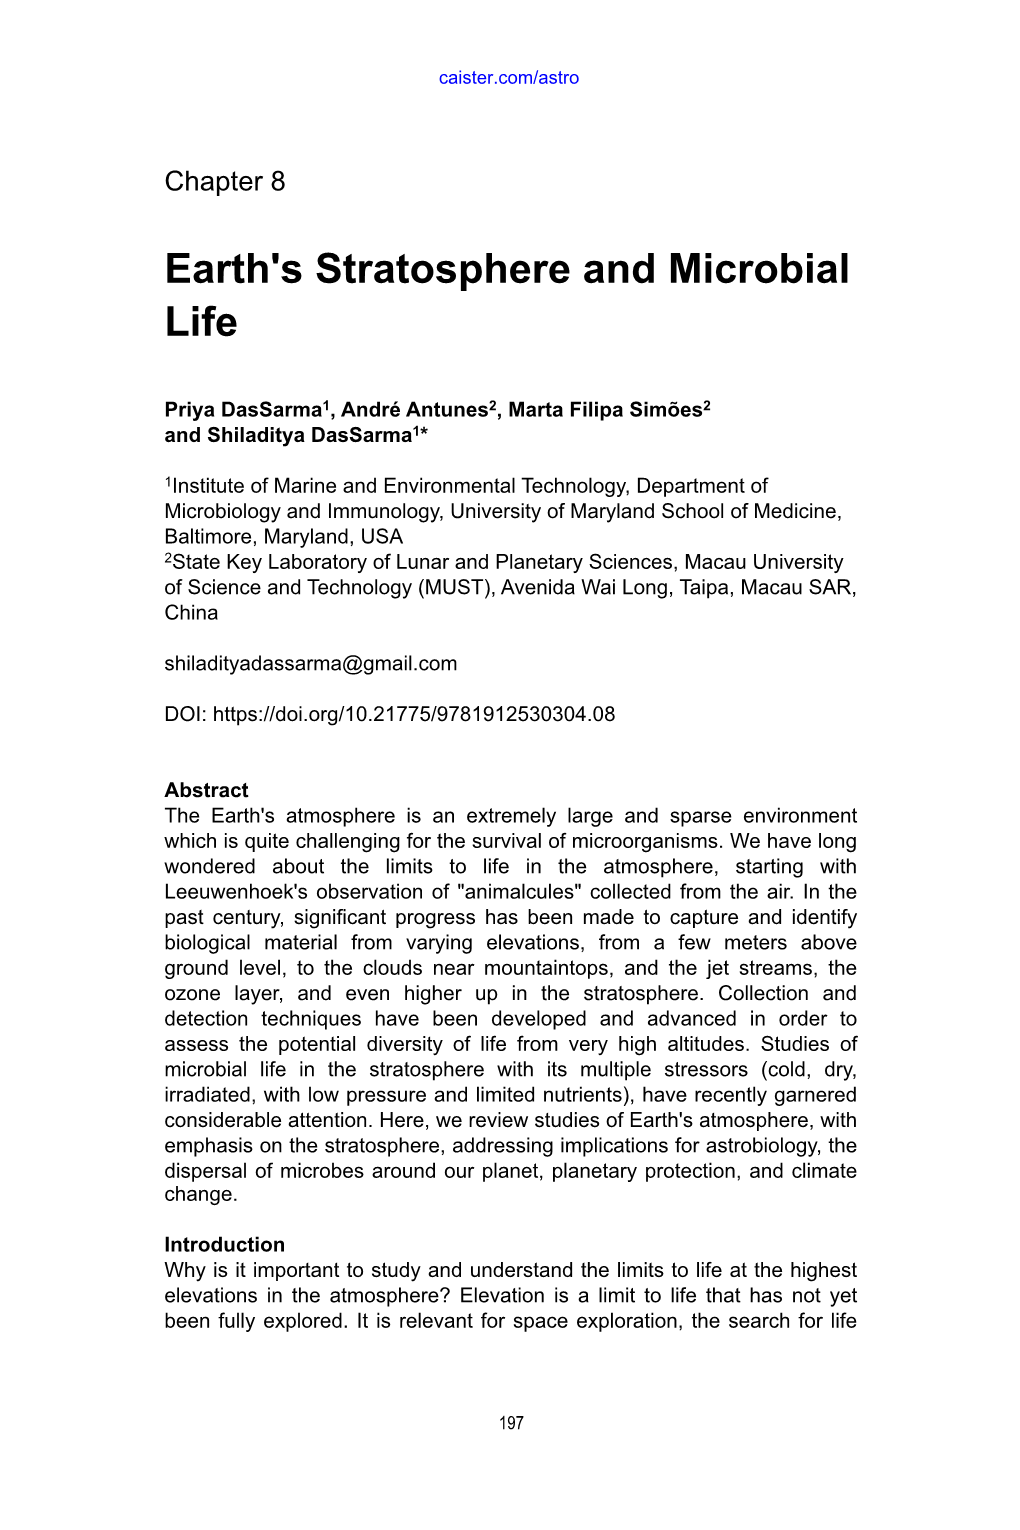 Earth's Stratosphere and Microbial Life